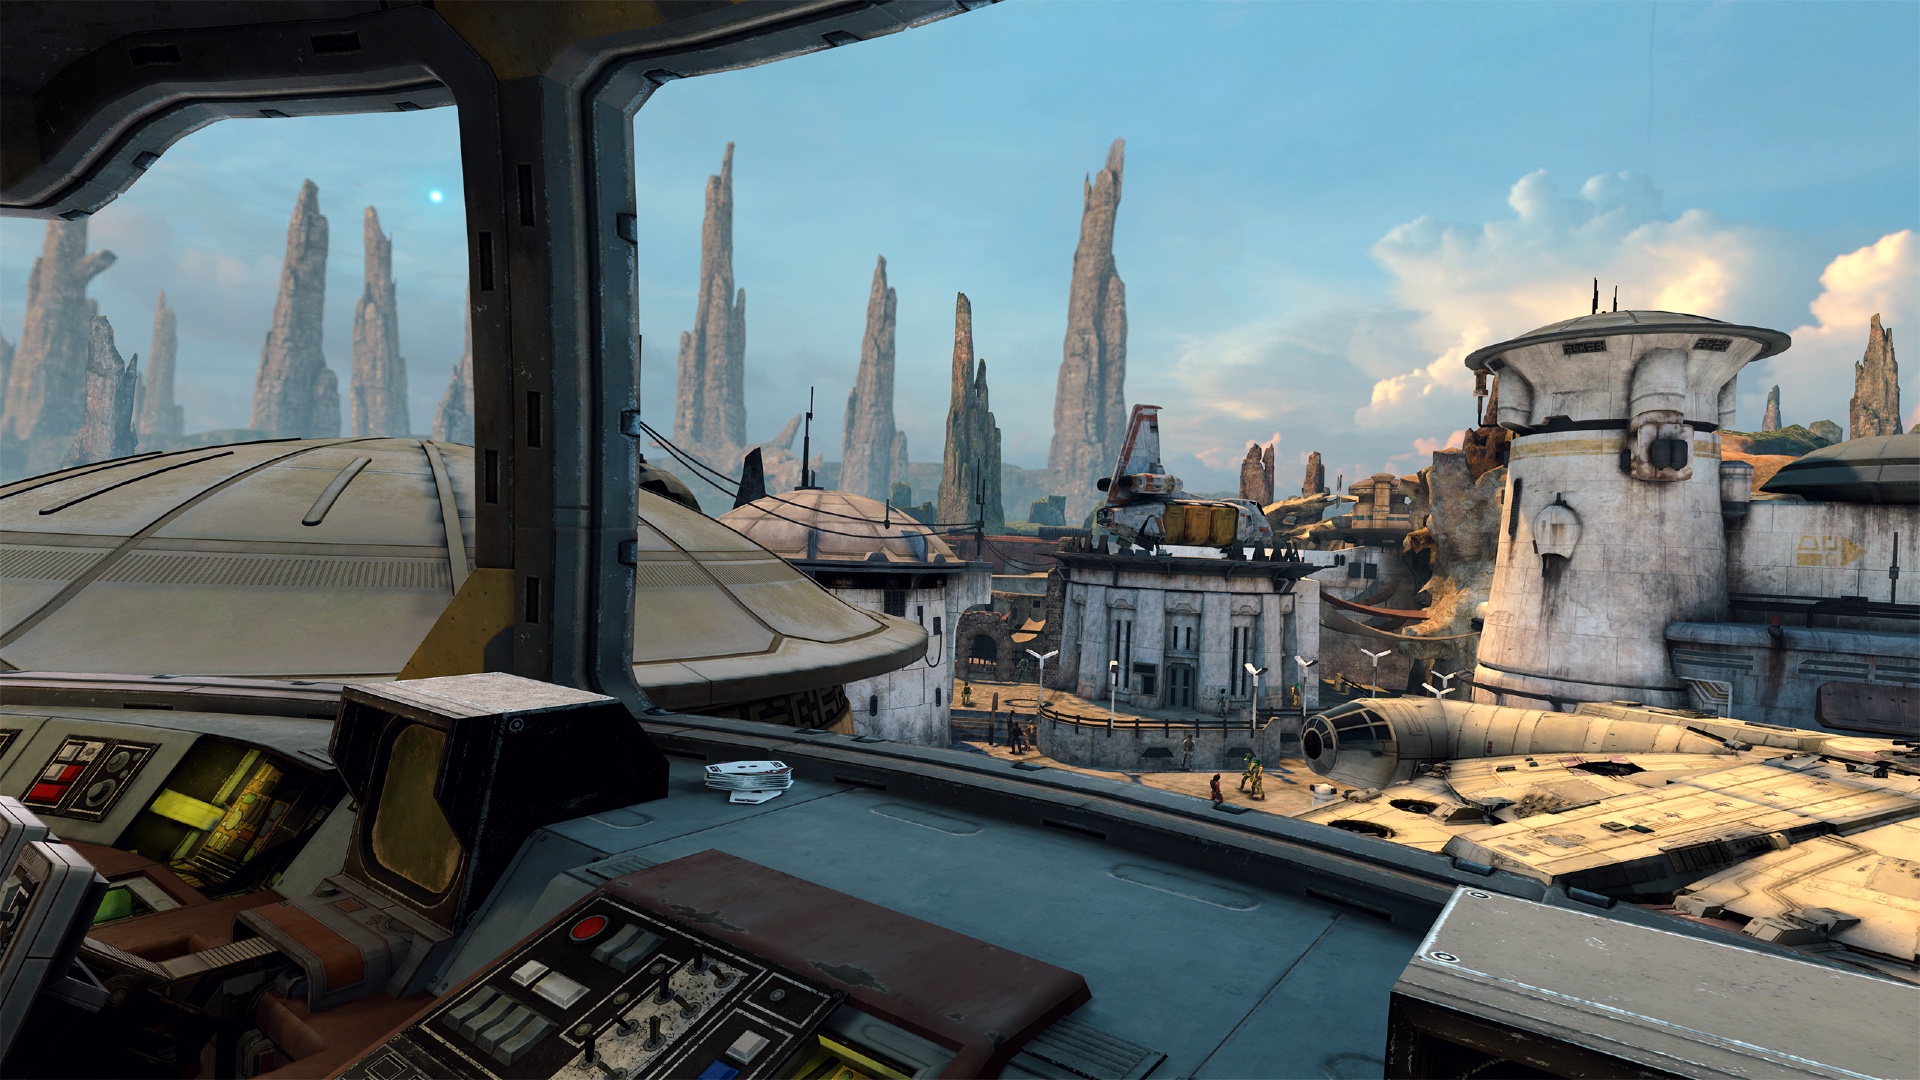 This view is as close as you'll get to the actual Star Wars: Galaxy's Edge. (Image: ILMxLAB)